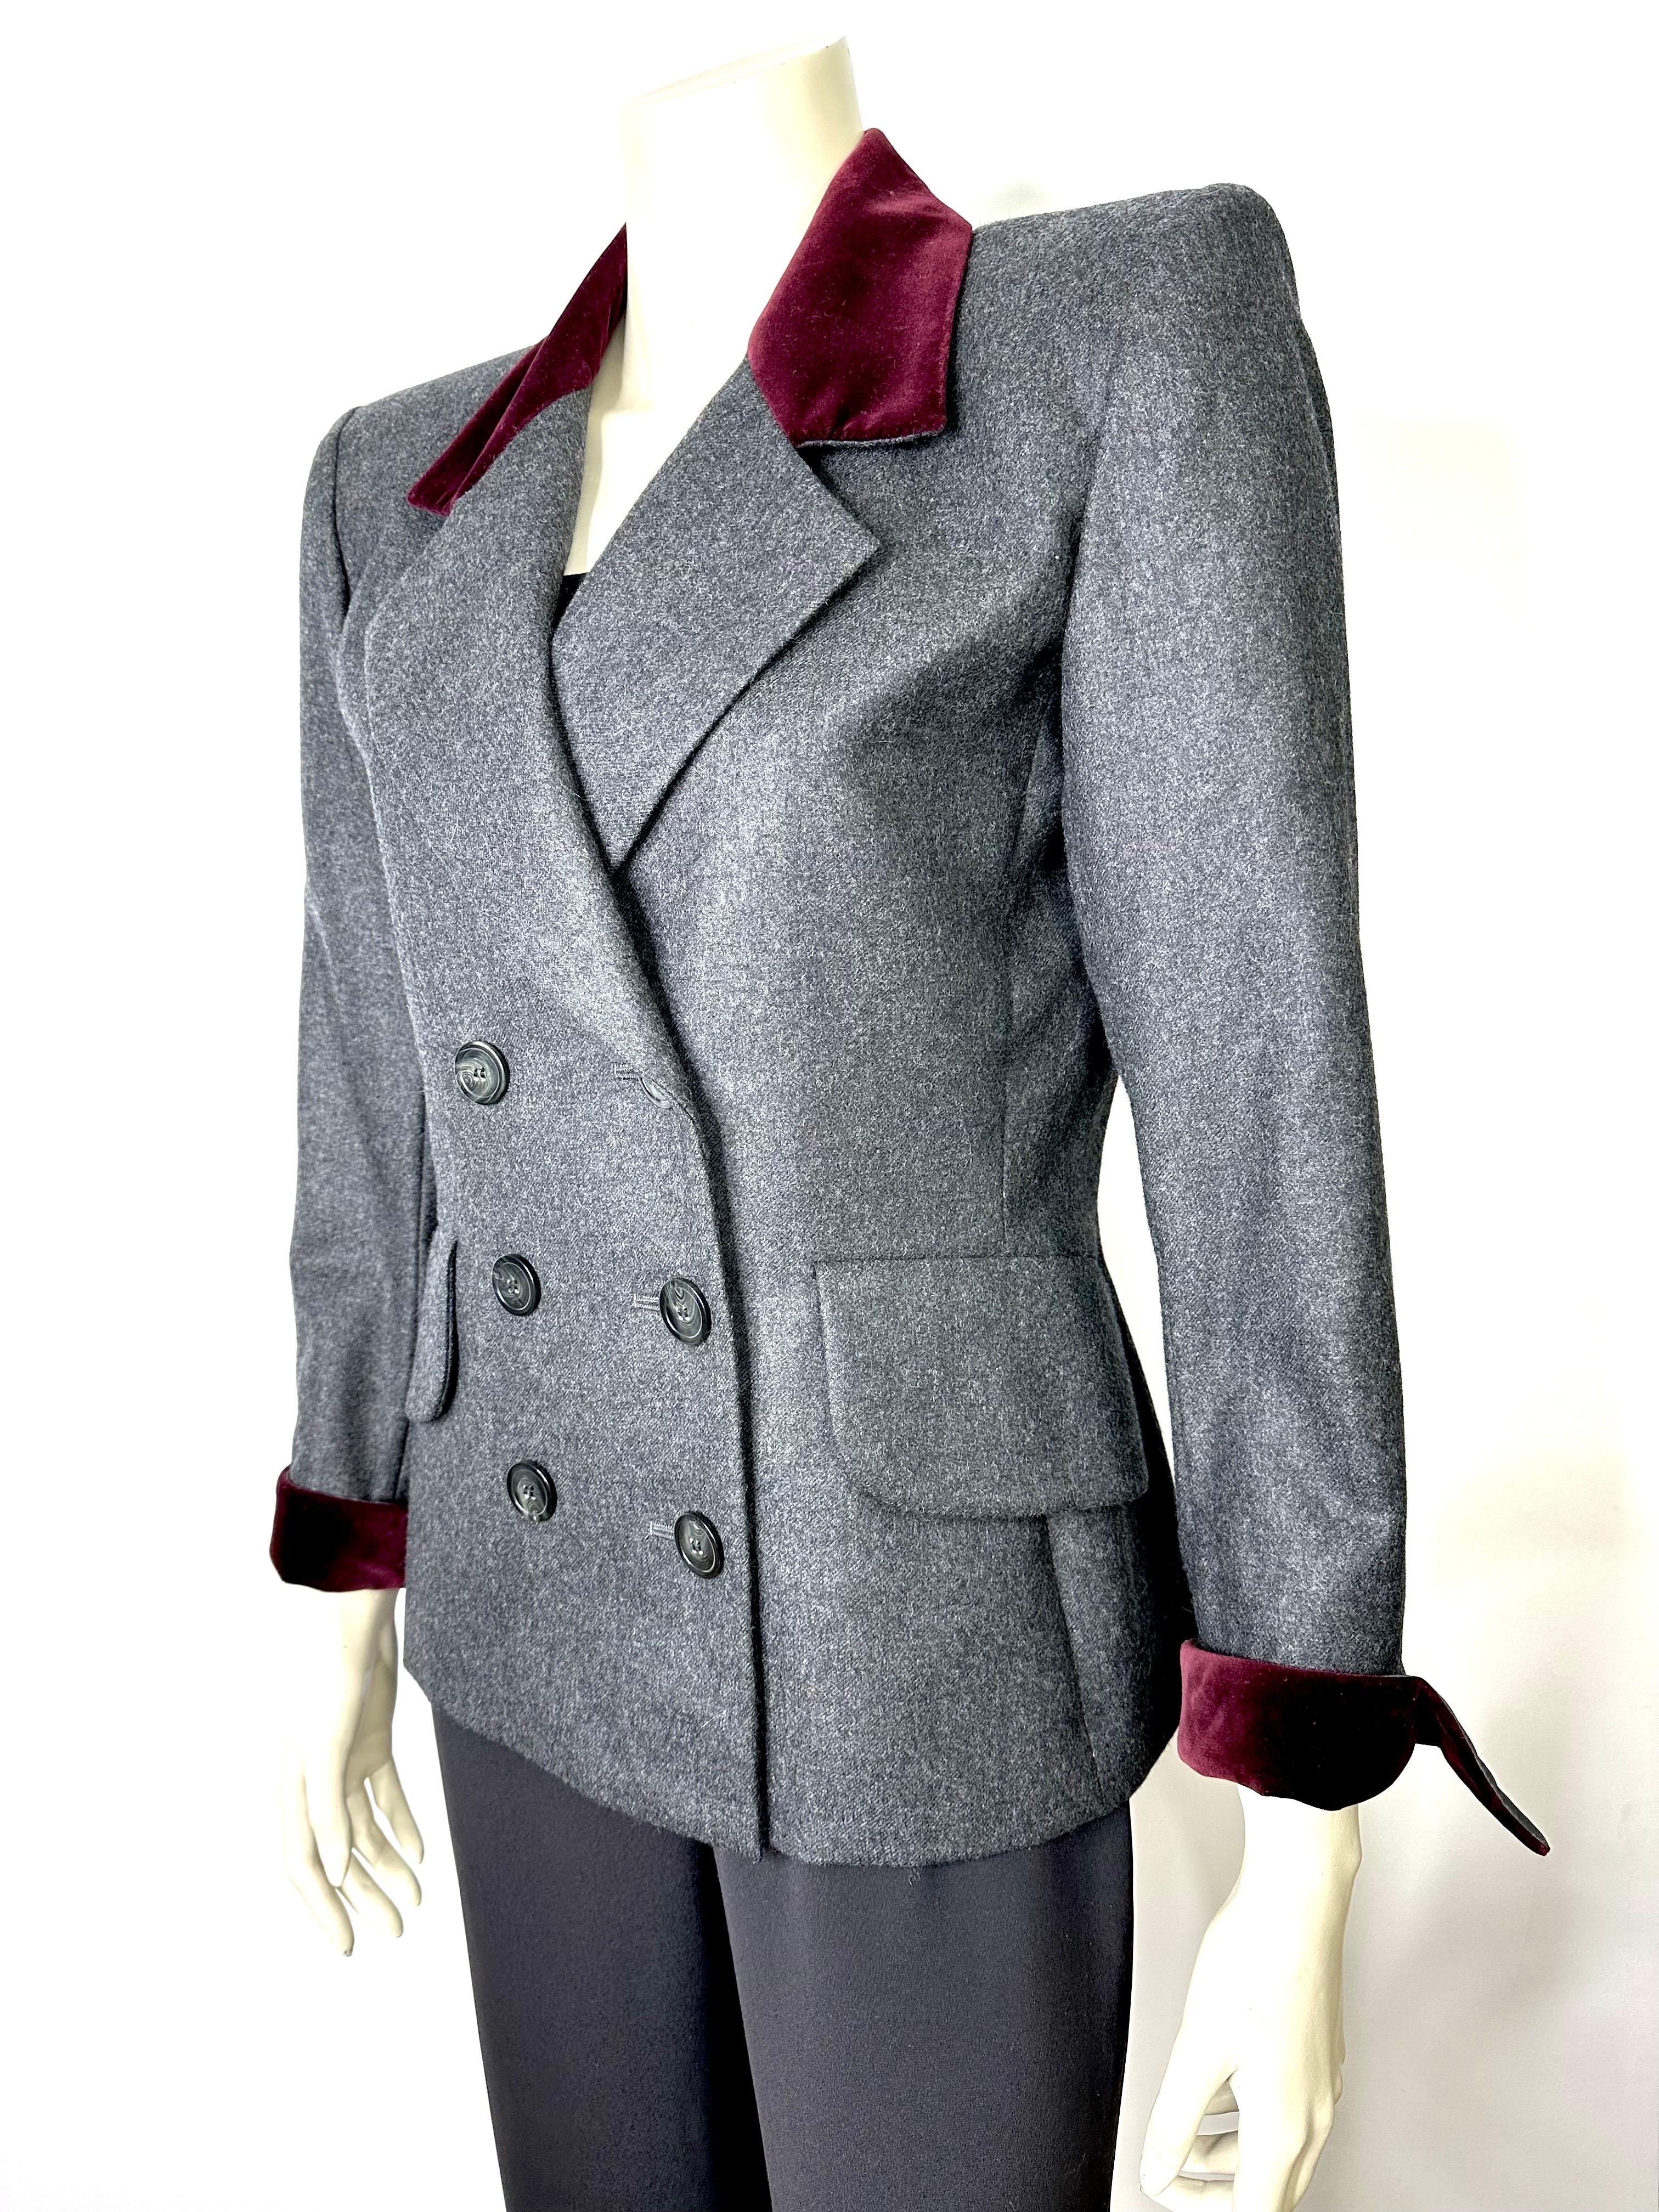 Vintage Yves saint Laurent grey wool blazer from 1990 For Sale 6